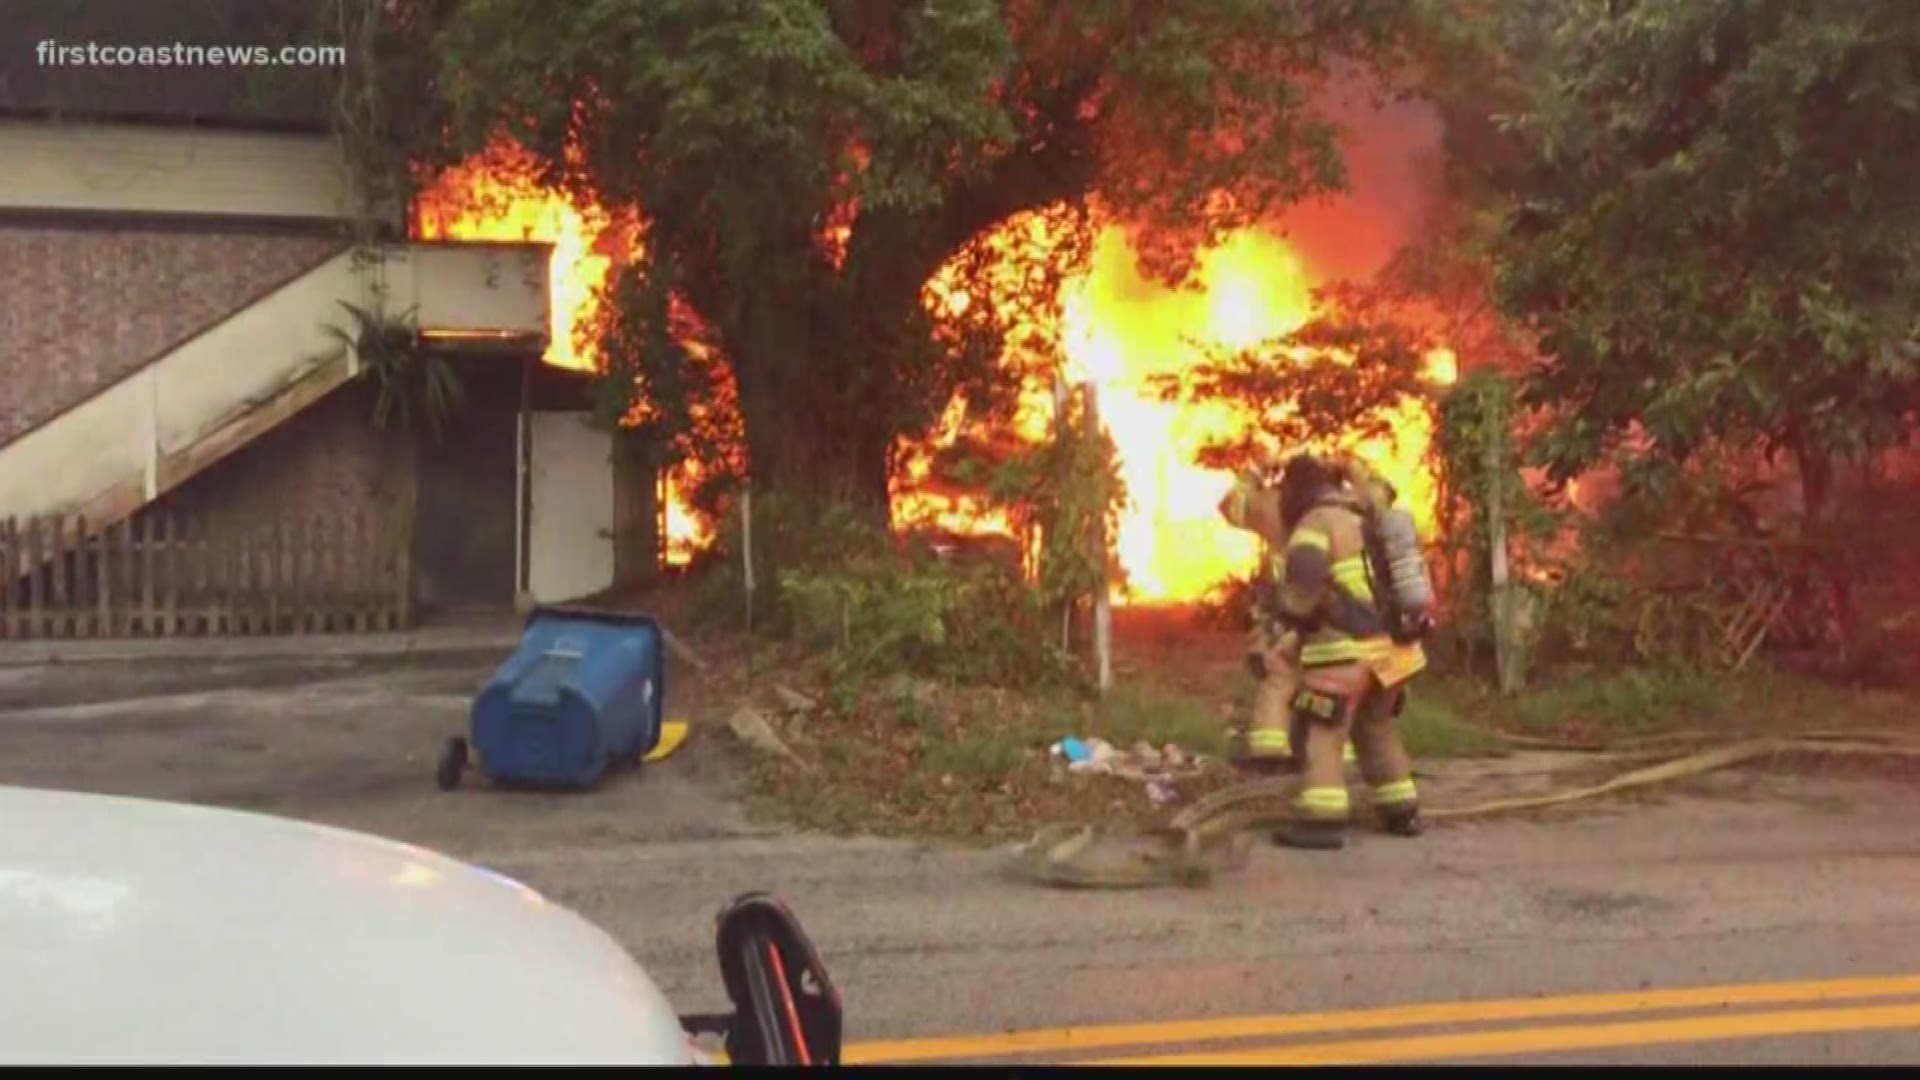 A neighbor says a homeless man started the fire because he was tired of looking at it empty.